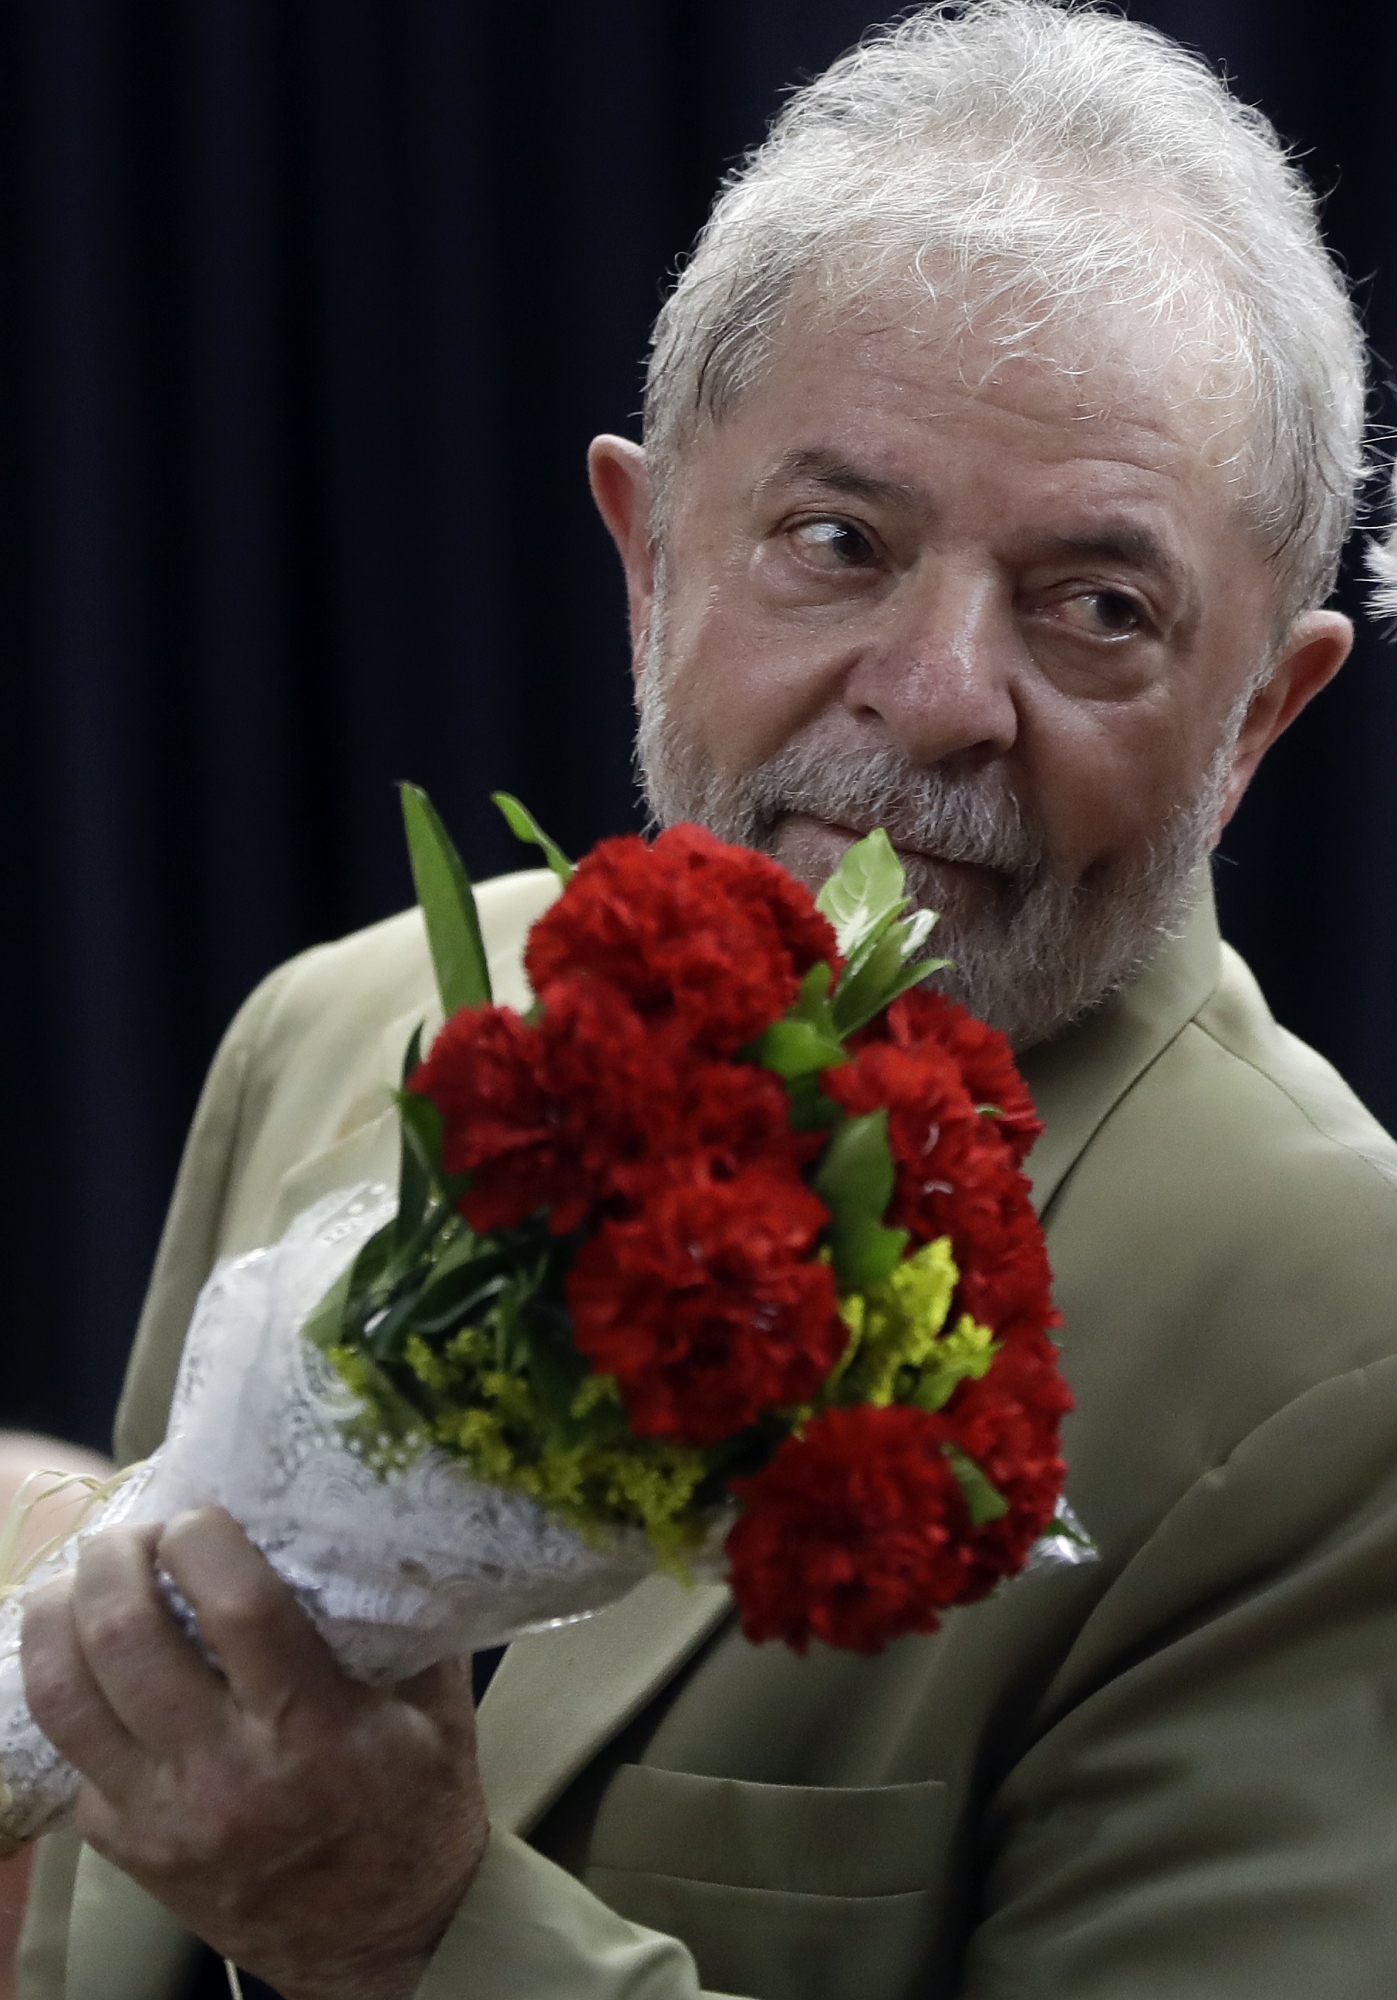 Former Brazilian President Luiz Inacio Lula da Silva holds a bouquet of flowers that he received from a supporter, during the launch of his book in Sao Paulo, Brazil, Friday, March 16, 2018. In his book entitled "Truth Will Triumph: The People Know Why I am Being Condemned," Lula da Silva says he is ready to go to jail and serve a 12 year and one month sentence on corruption charges. (AP Photo/Andre Penner) Brazil Ex President Book